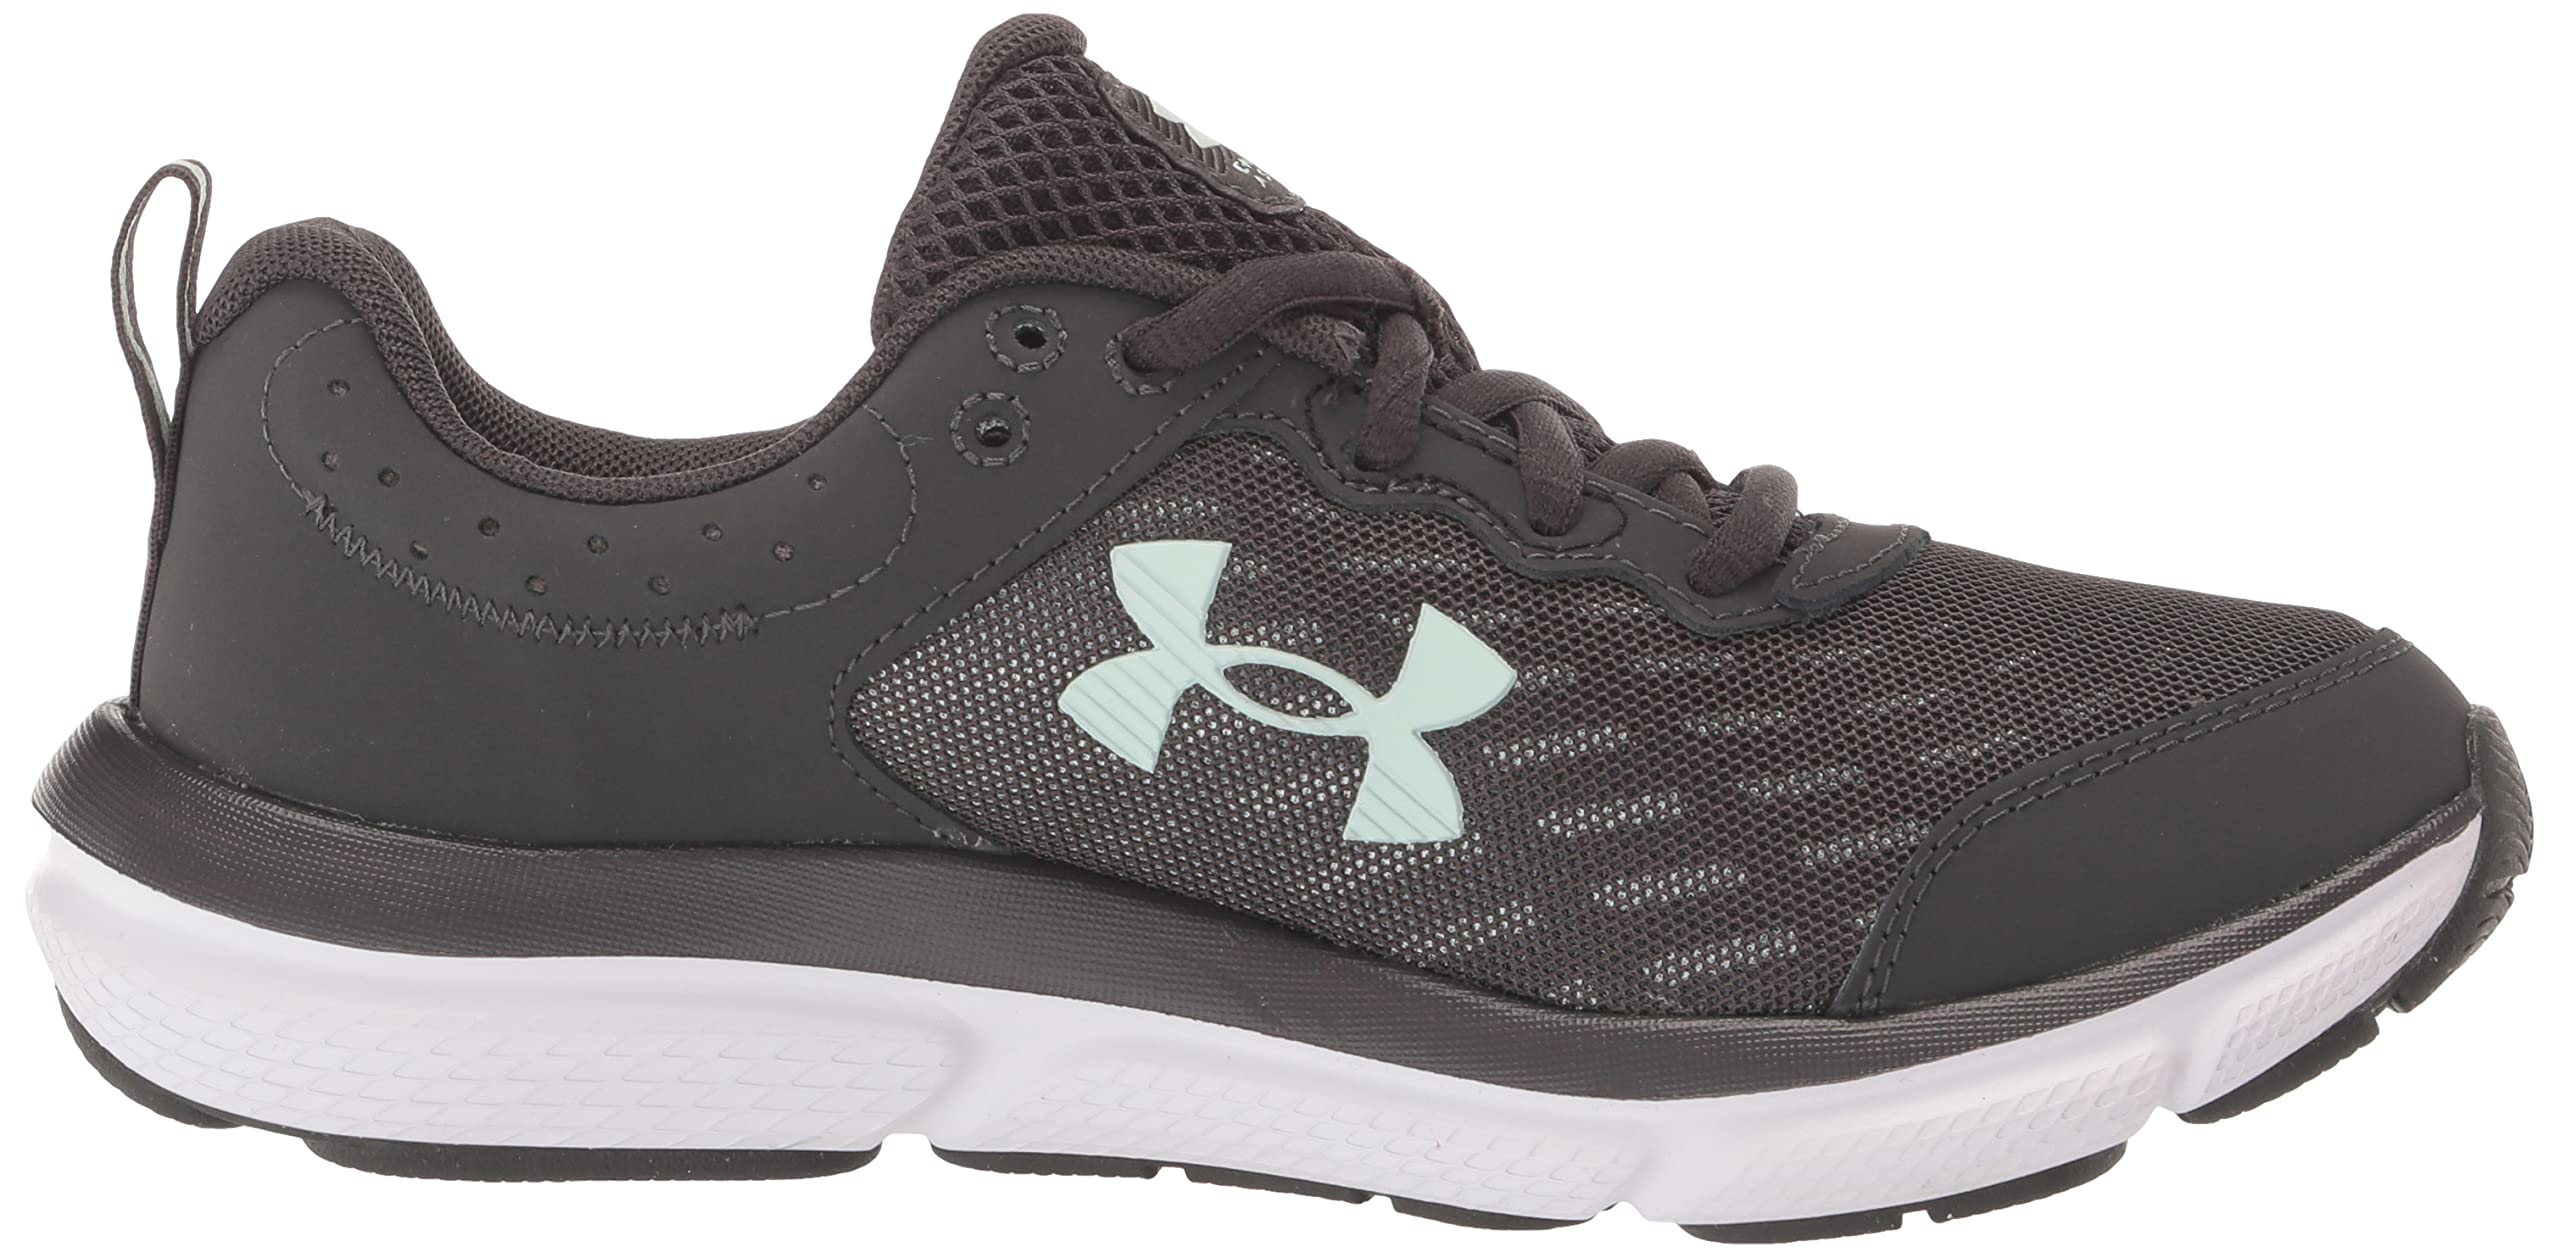 Under Armour womens Charged Assert 10